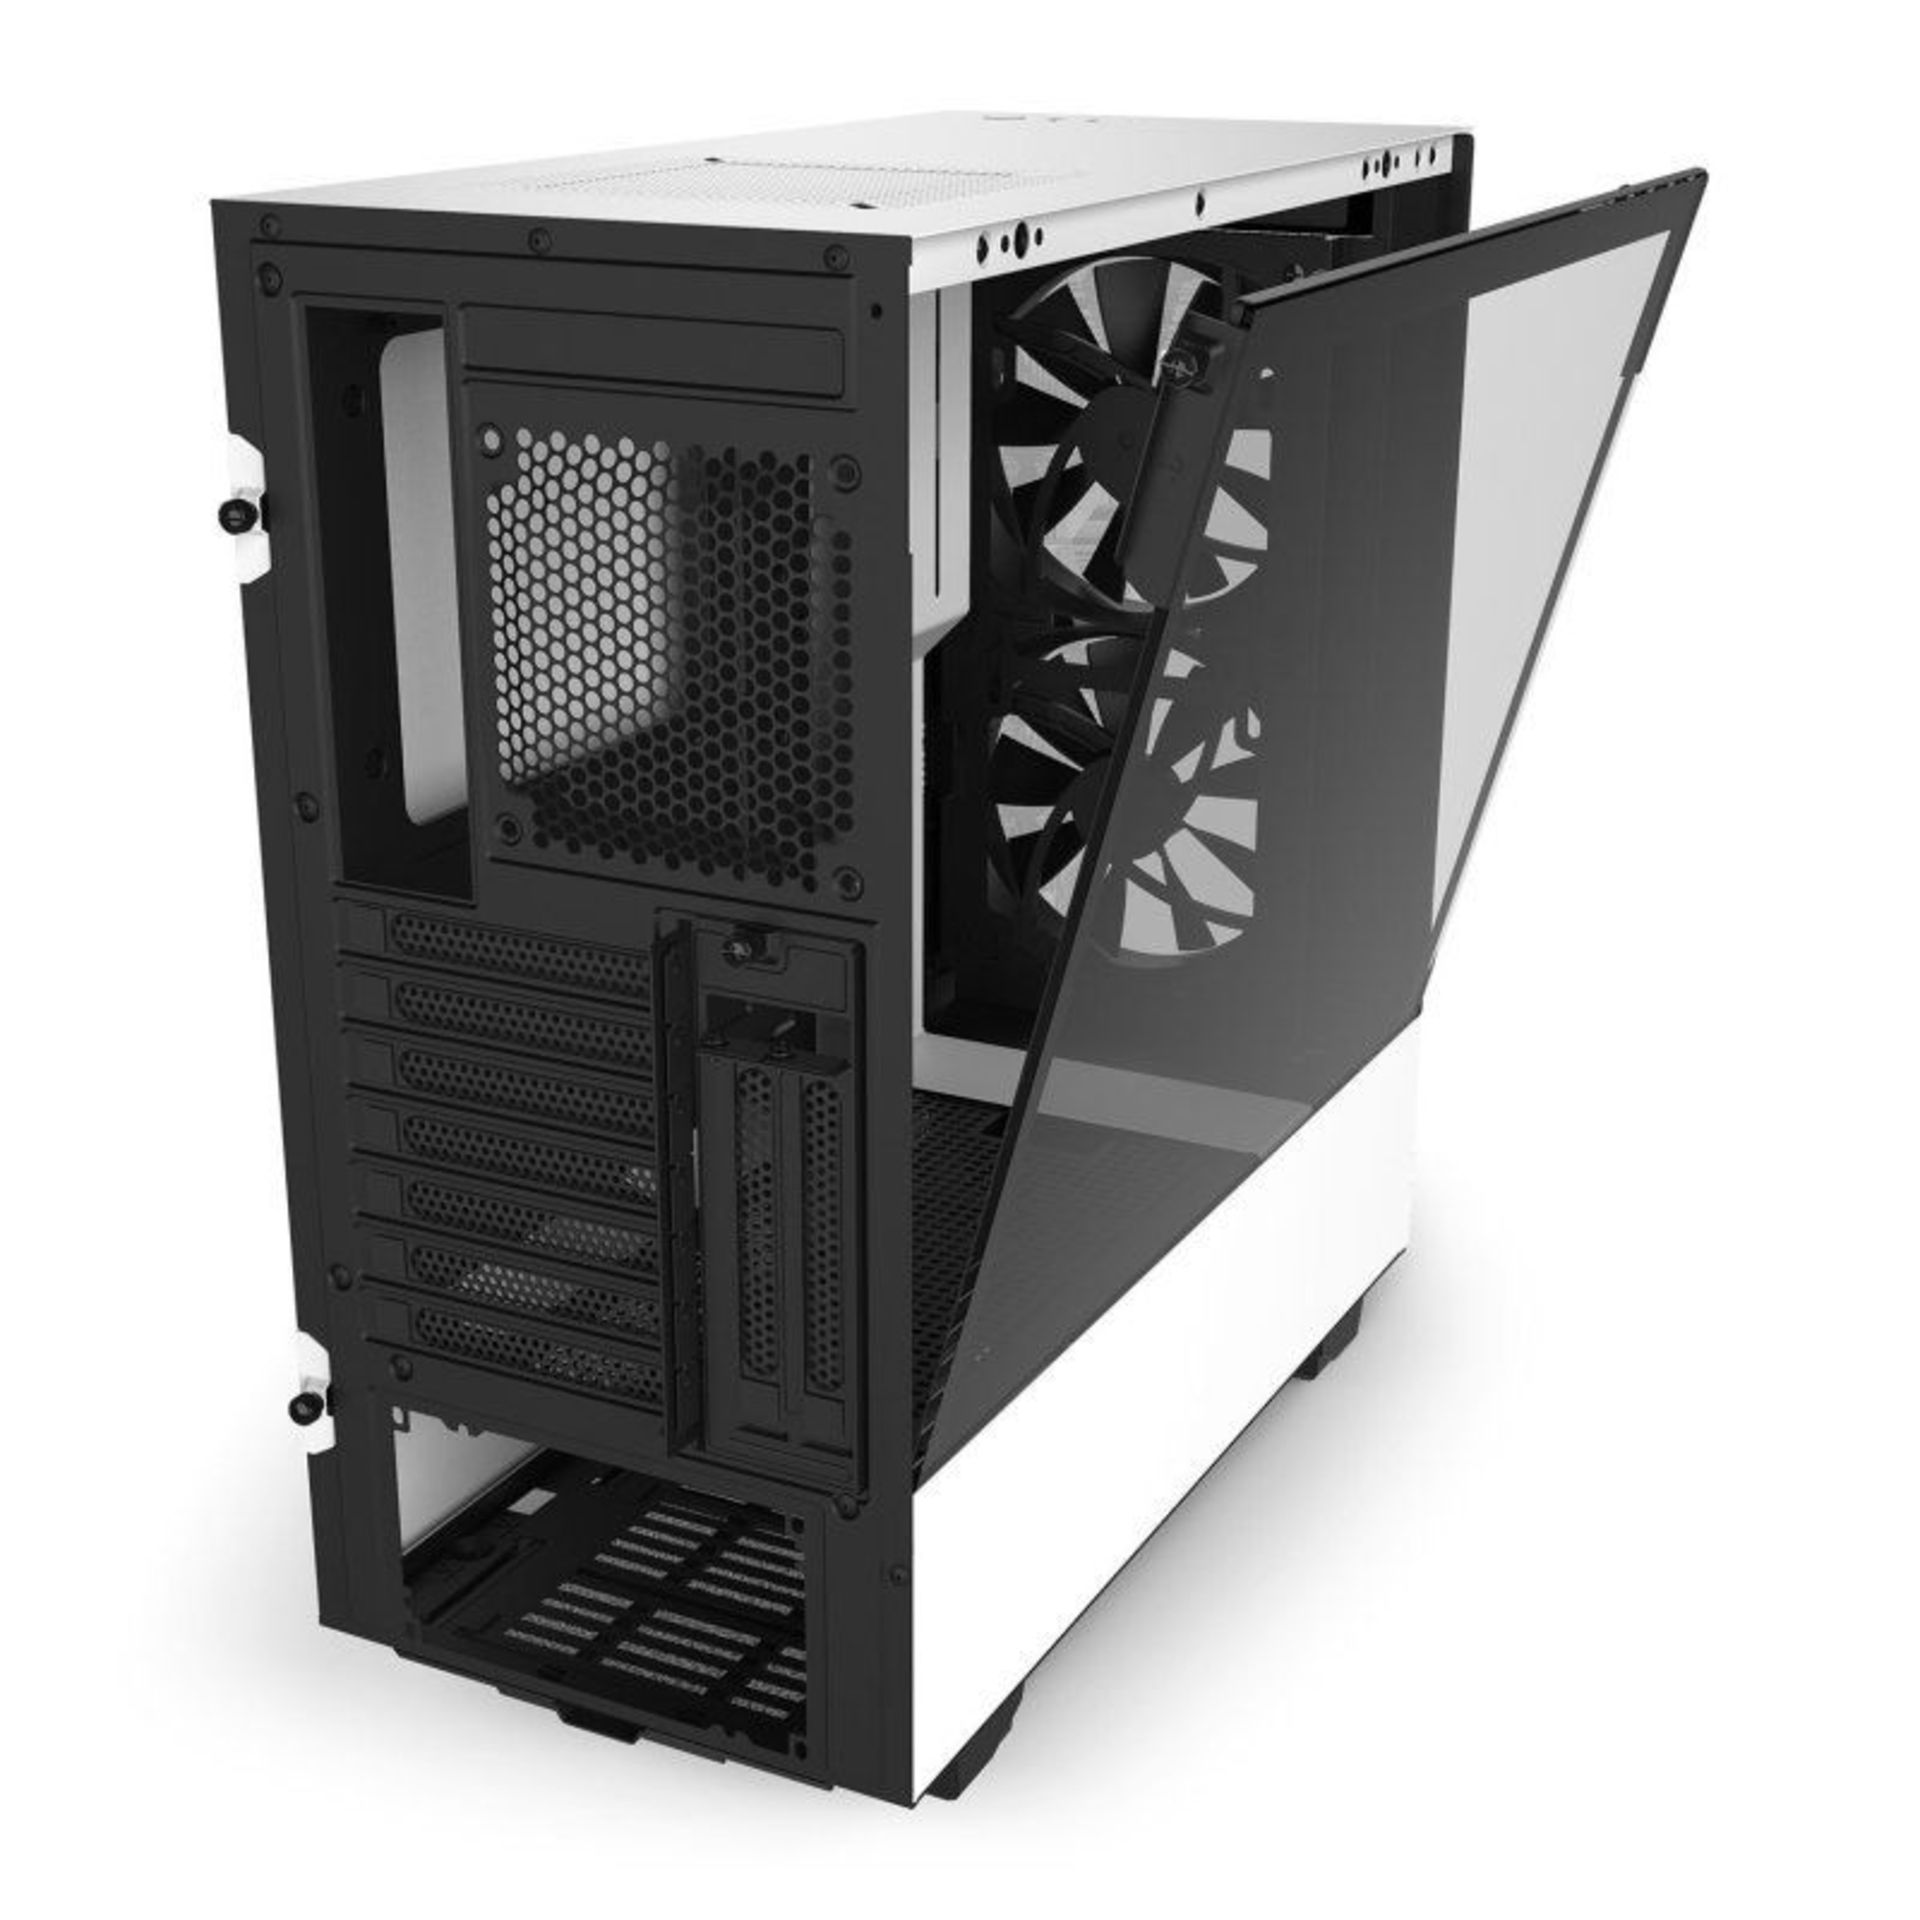 NZXT H510 Elite Matte White / Black Mid Tower Case. - ER21. RRP £359.00. The H510 Elite compact - Image 2 of 3